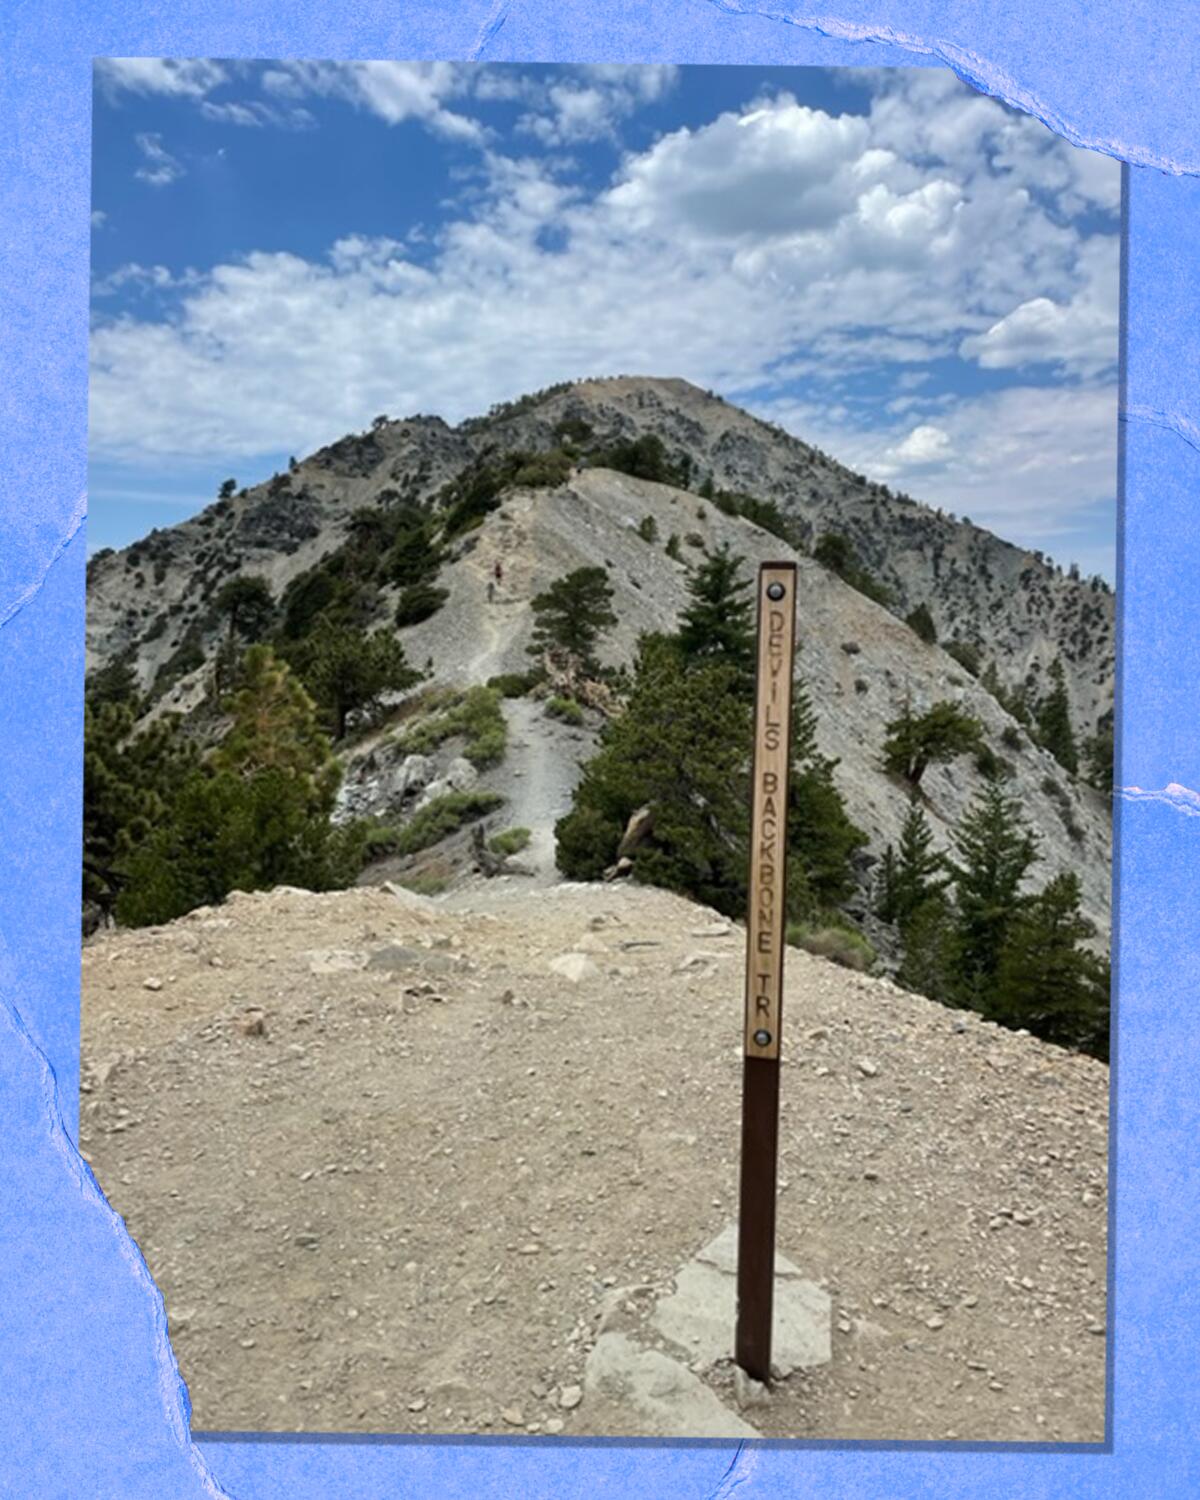 A narrow marker stands on a peak. In the background is another mountain with low green trees, and blue sky and clouds.